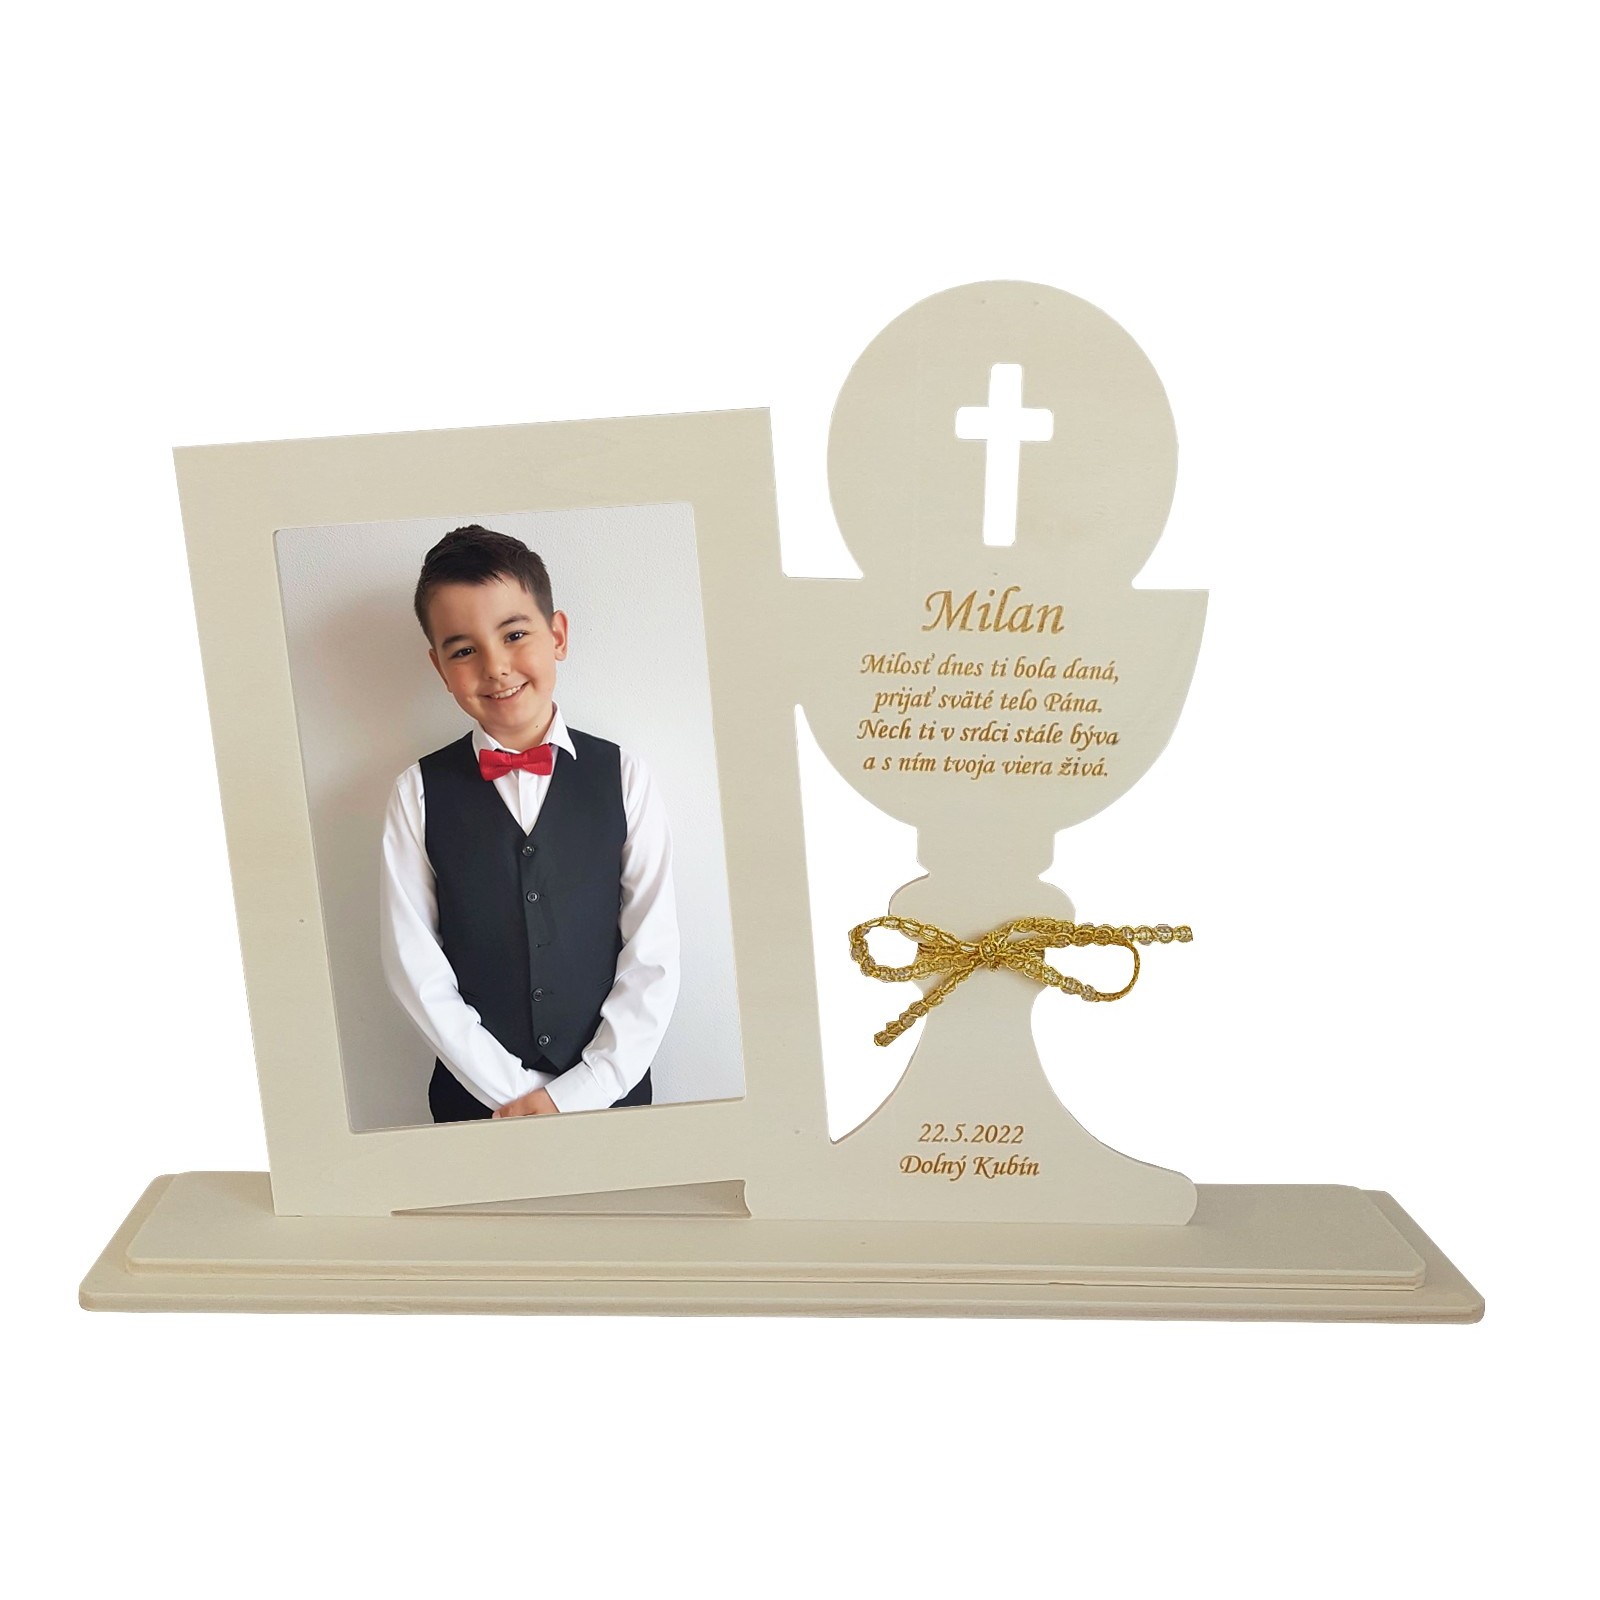 Donation for the 1st Holy Communion stand